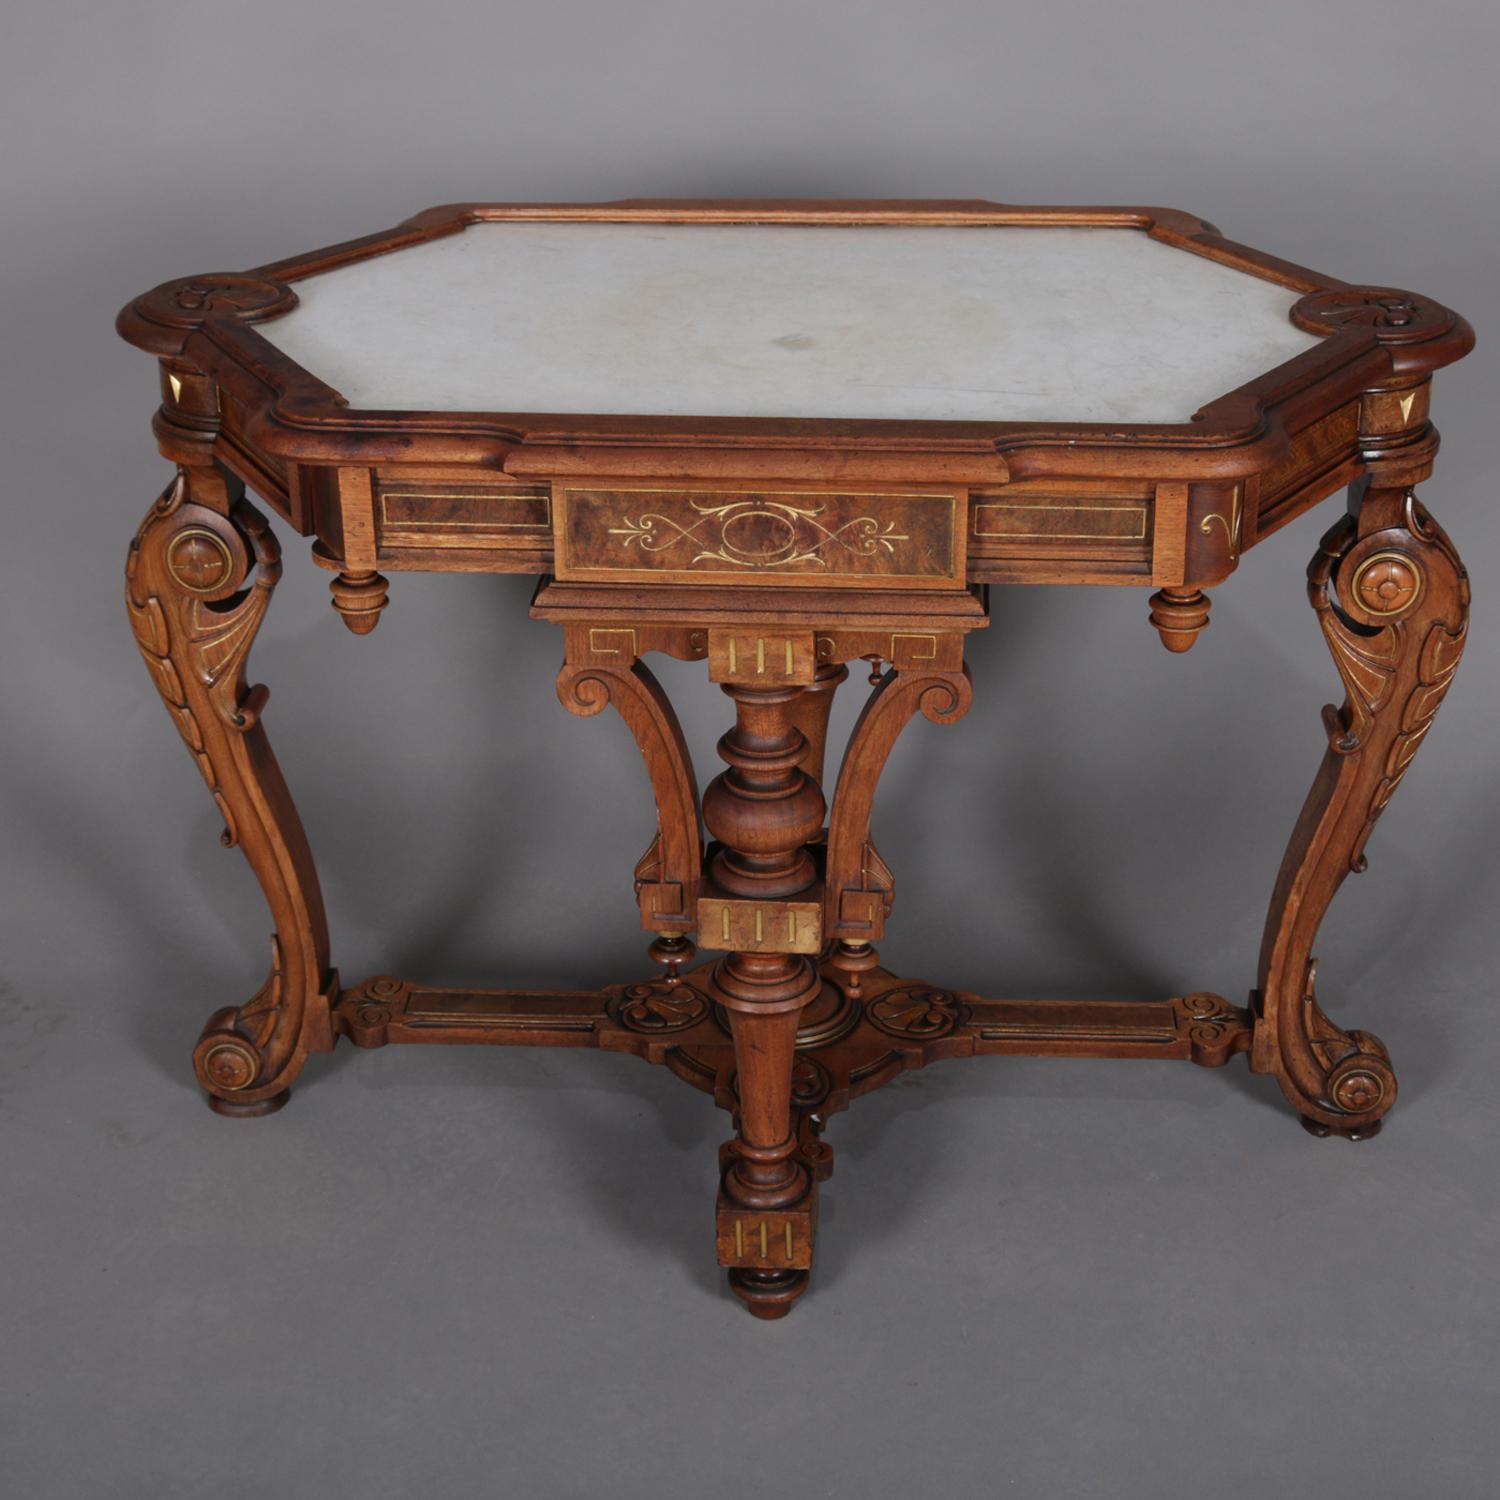 An antique neo Greco walnut center table features neoclassical design with elongated hexagonal form having inset picture frame marble top with gilt and burl decorated skirt accented with drop finials and raised on carved acanthus form legs, circa